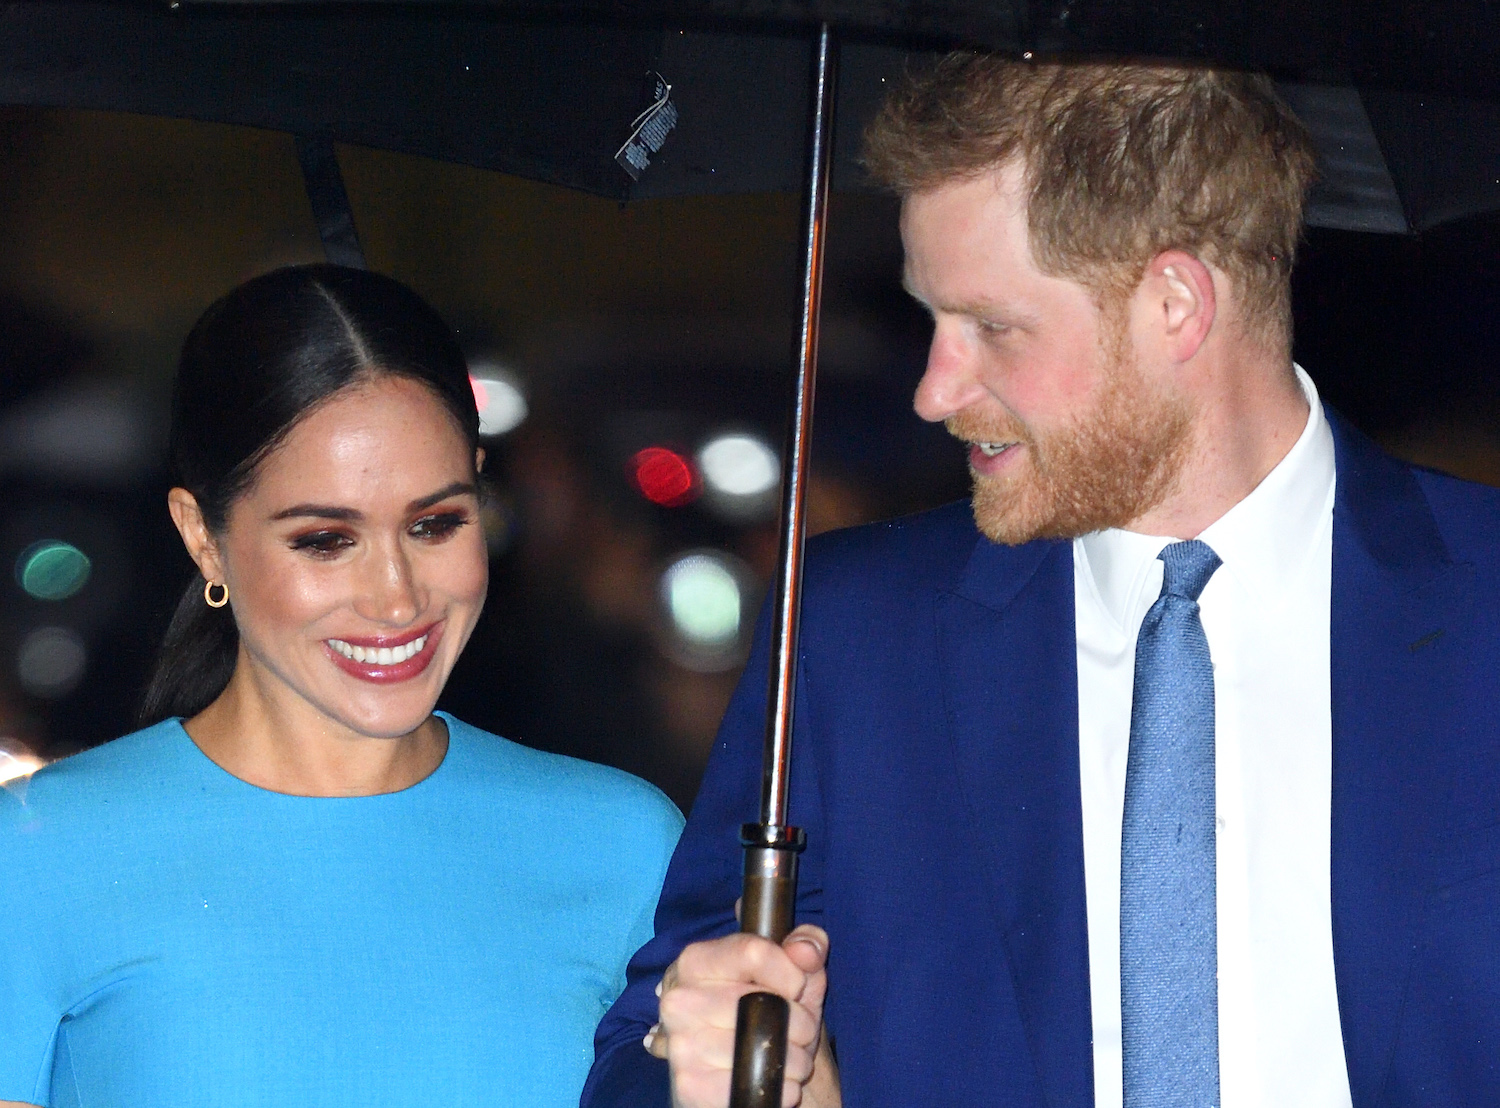 Prince Harry and Meghan Markle attend The Endeavour Fund Awards